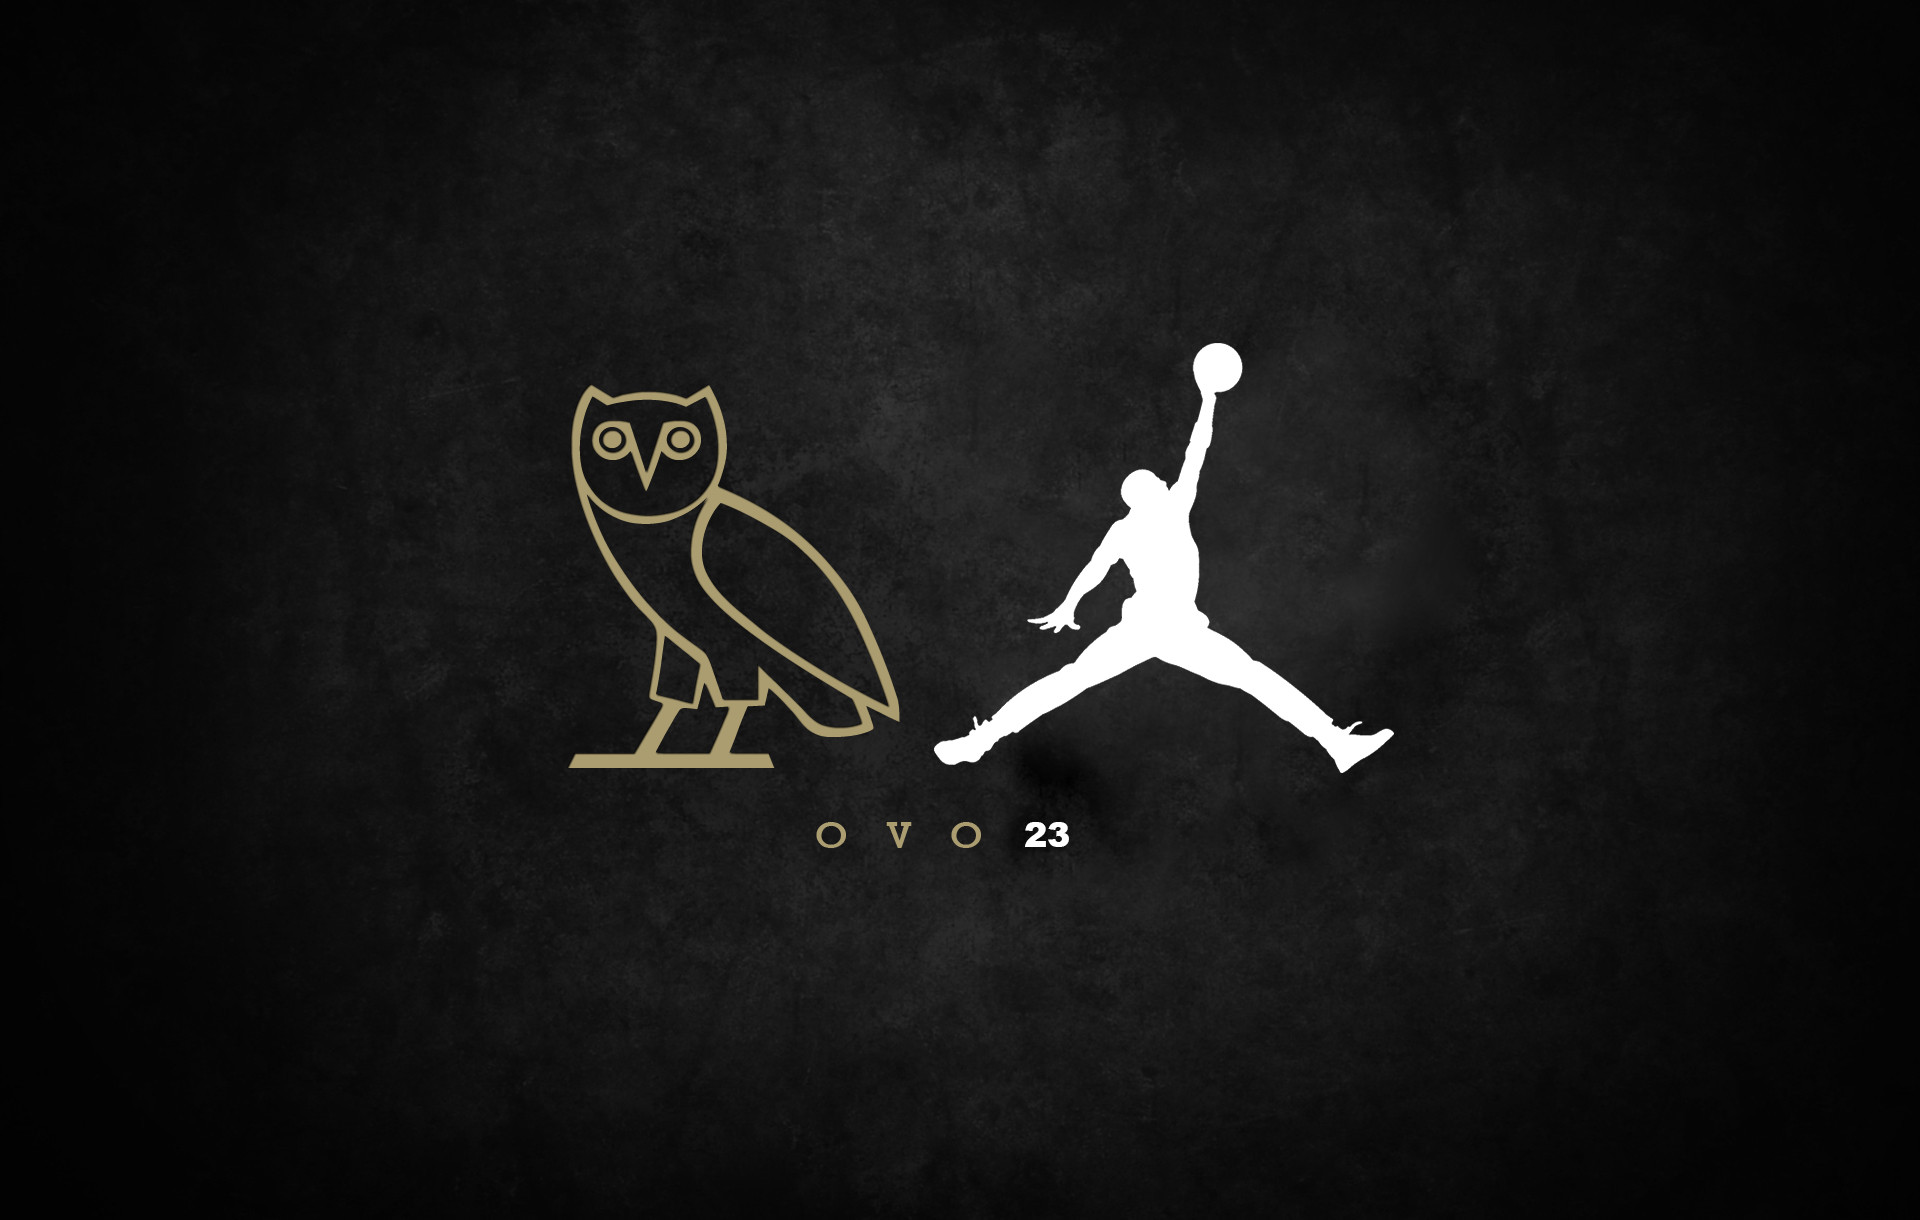 1920x1220 Drake/OVO wallpapers that you use?